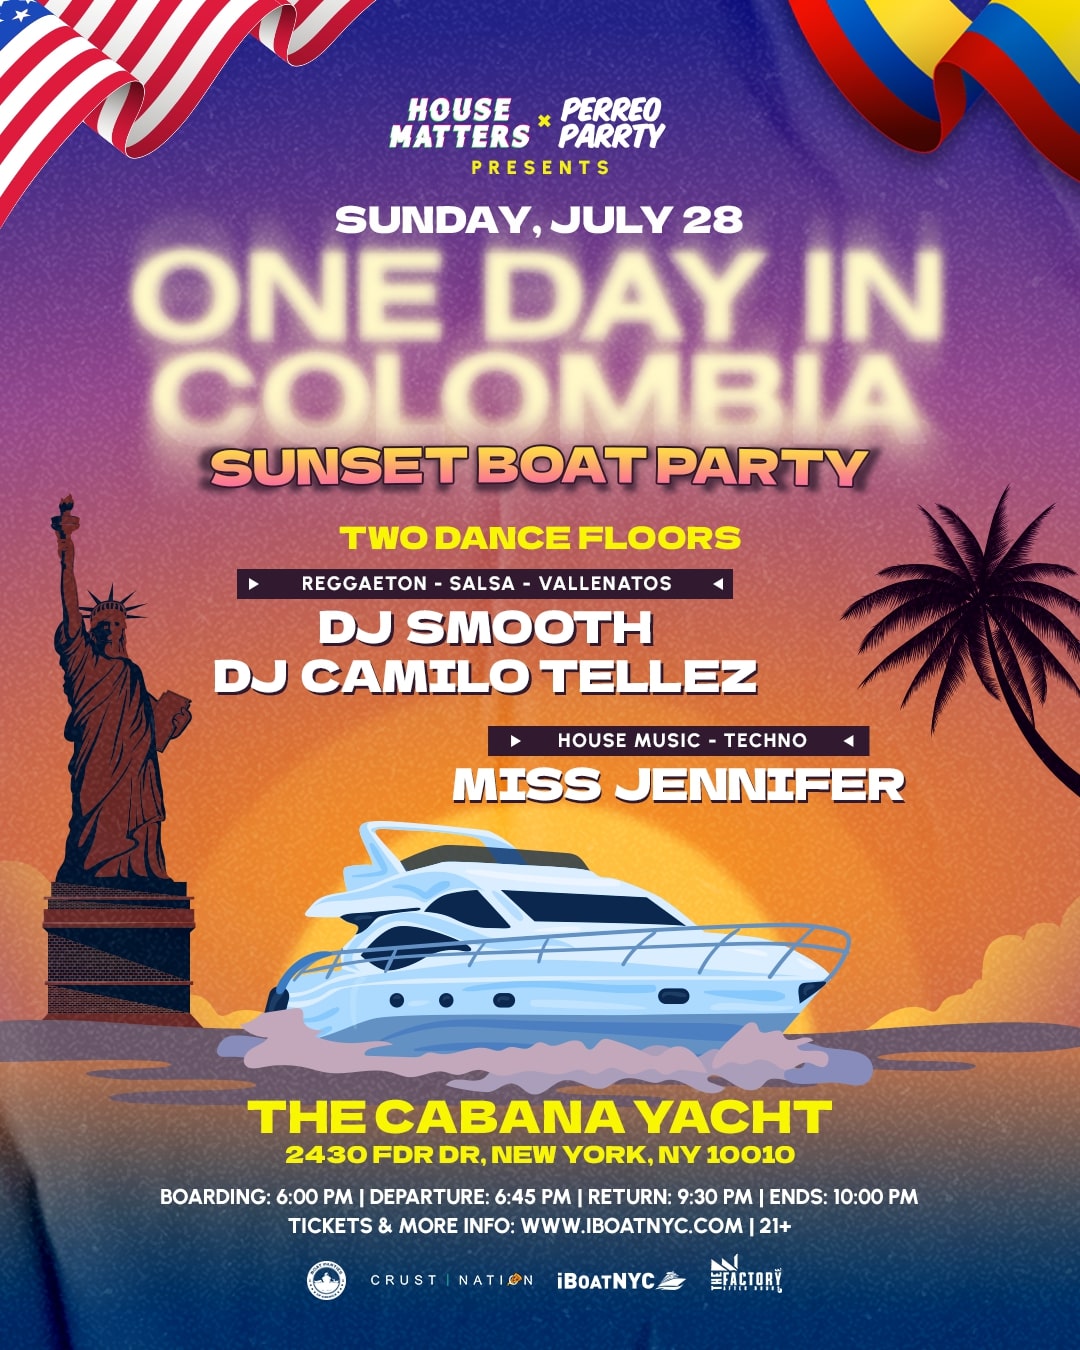 One Day in Colombia Sunset Boat Party - House v Reggaeton & Latin Cruise